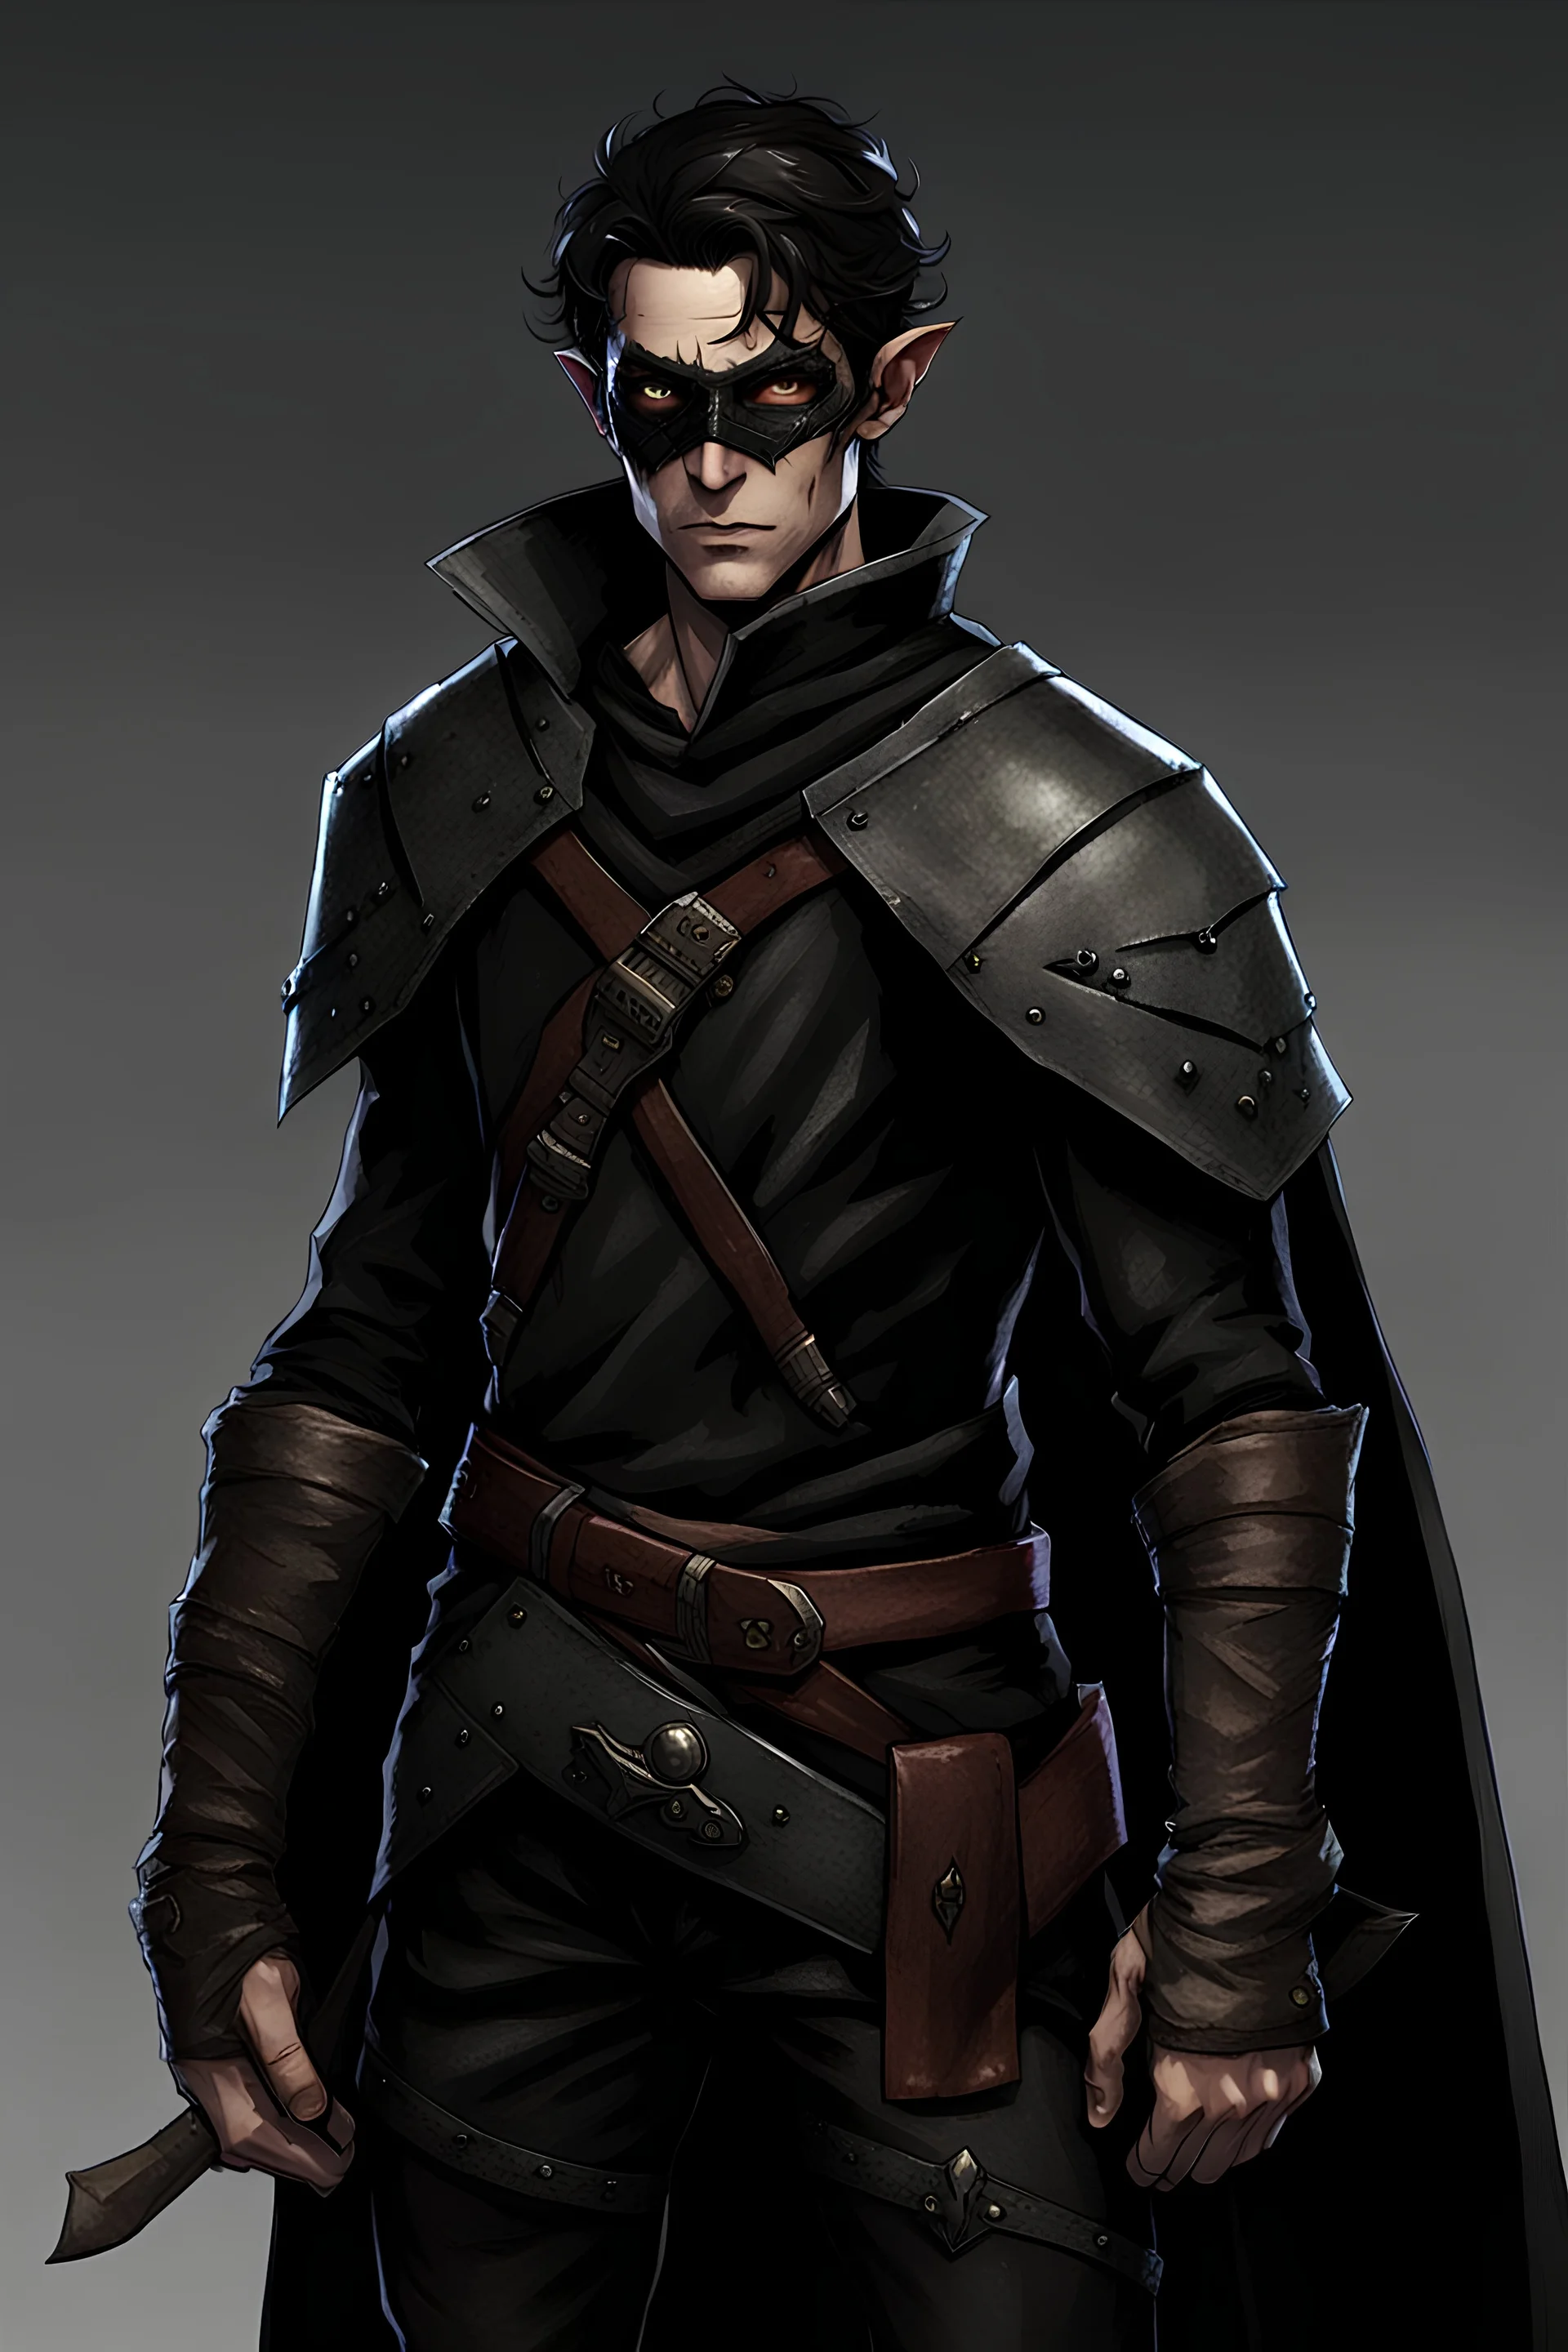 Young rogue elf male, with grey pale skin, wearing an eye patch on the left eye, bandages on his arms, wearing black leather clothes with a shoulder cape